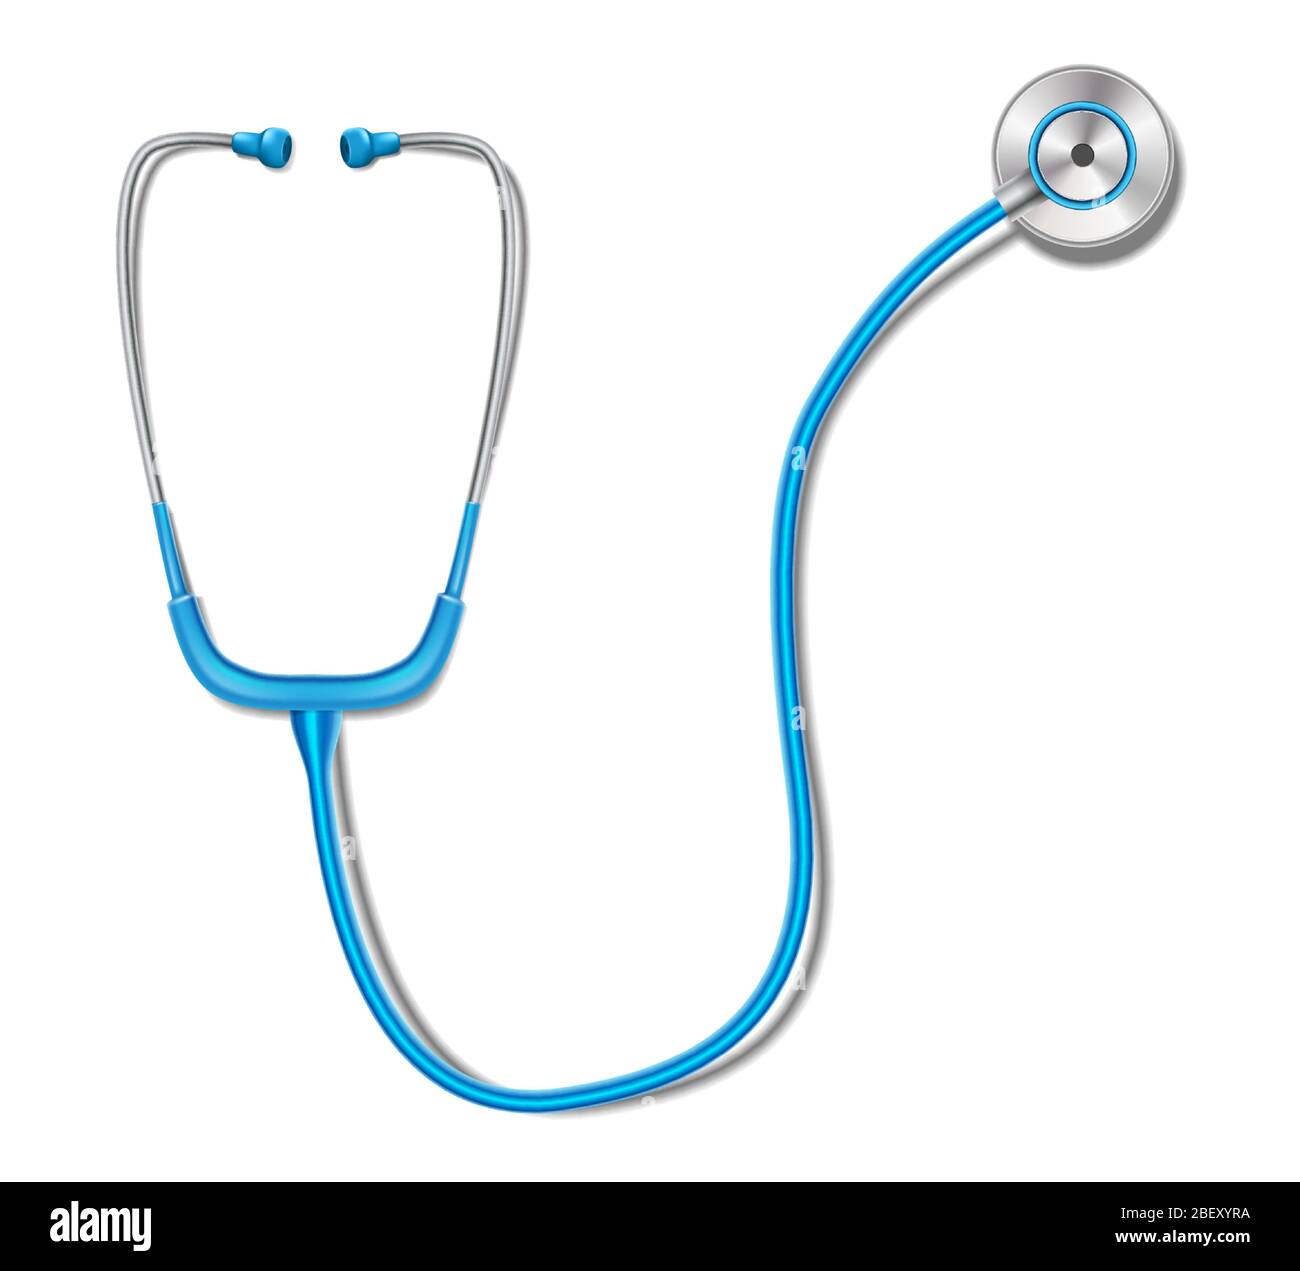 Health care concept with blue stethoscope mockup isolated. Realistic stethoscope medicine equipment for health diagnosis. Vector illustration Stock Vector